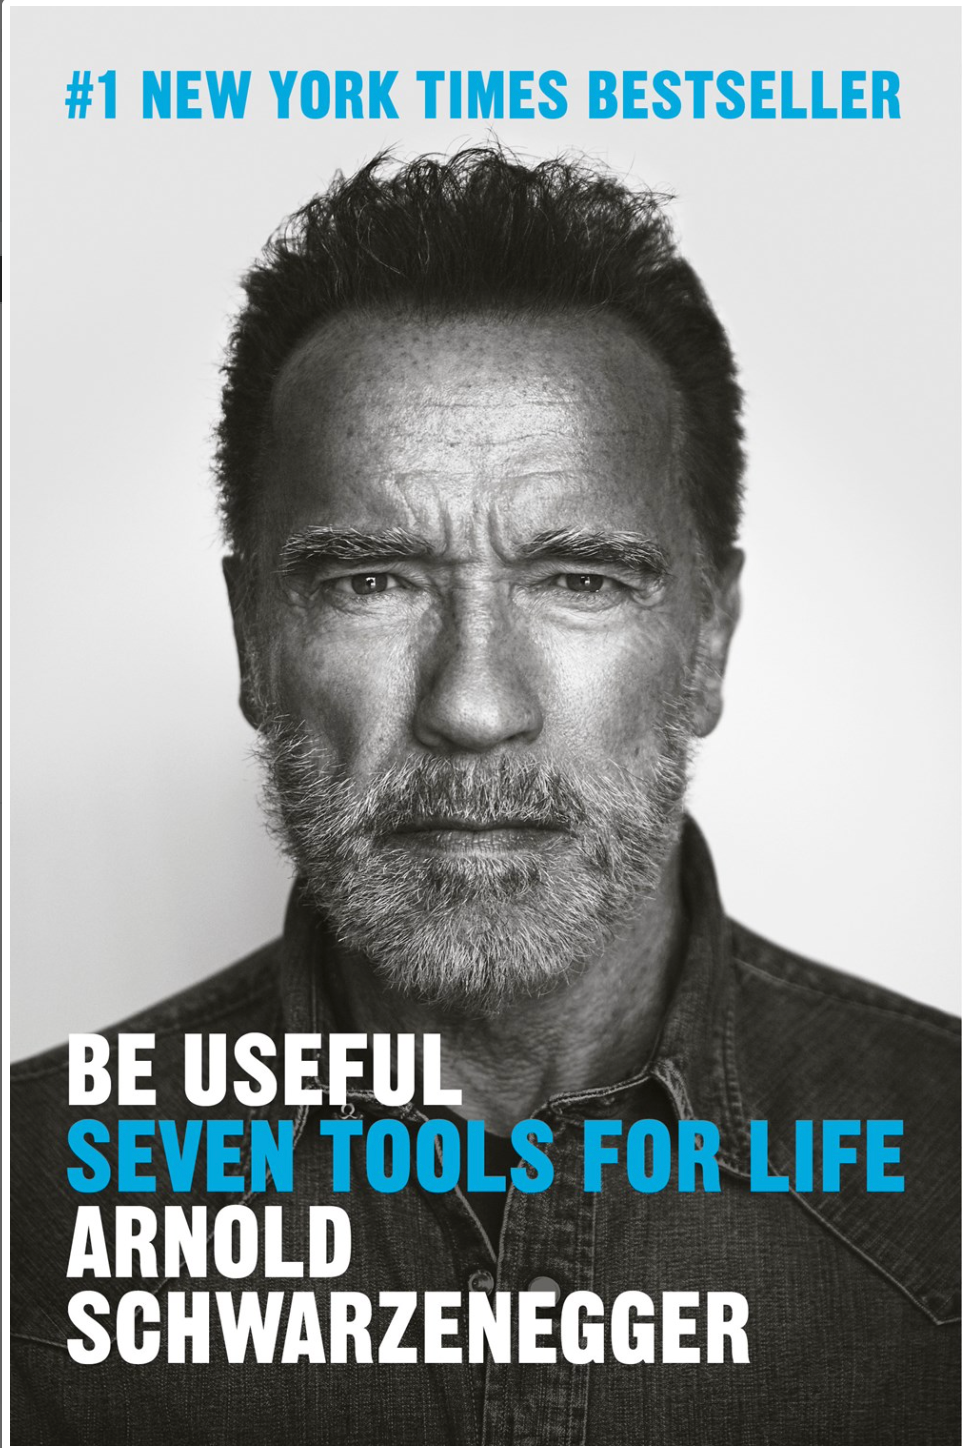 Be Useful - Seven Tools for Life